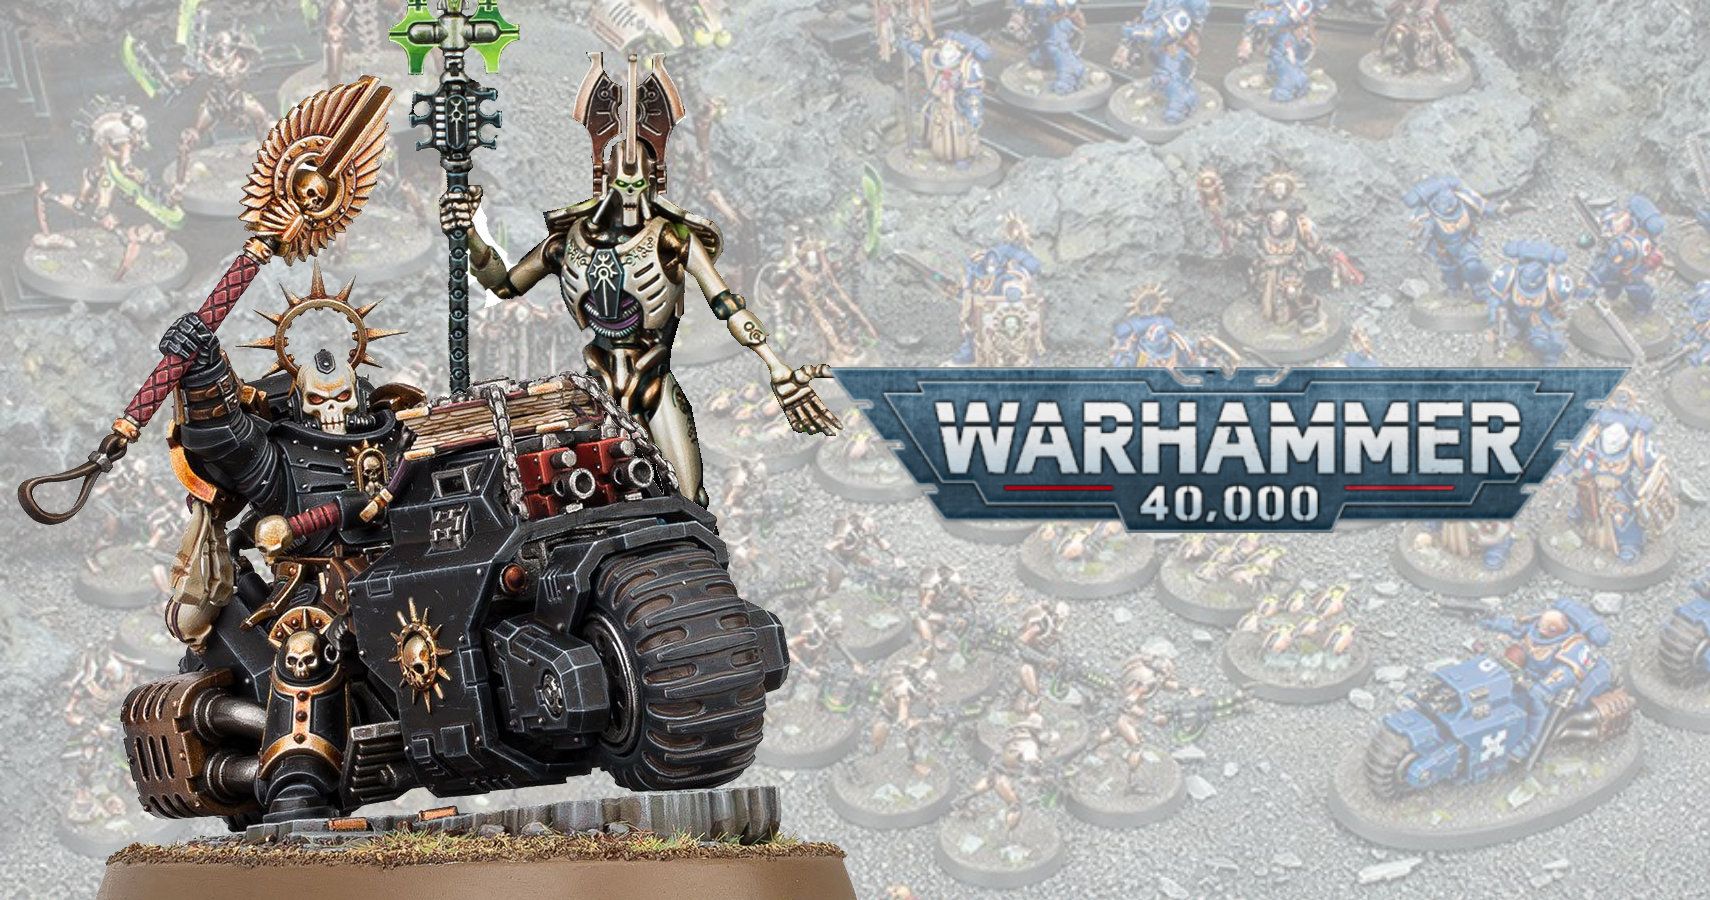 New Warhammer 40K Models Revealed In Time For Indomitus Launch